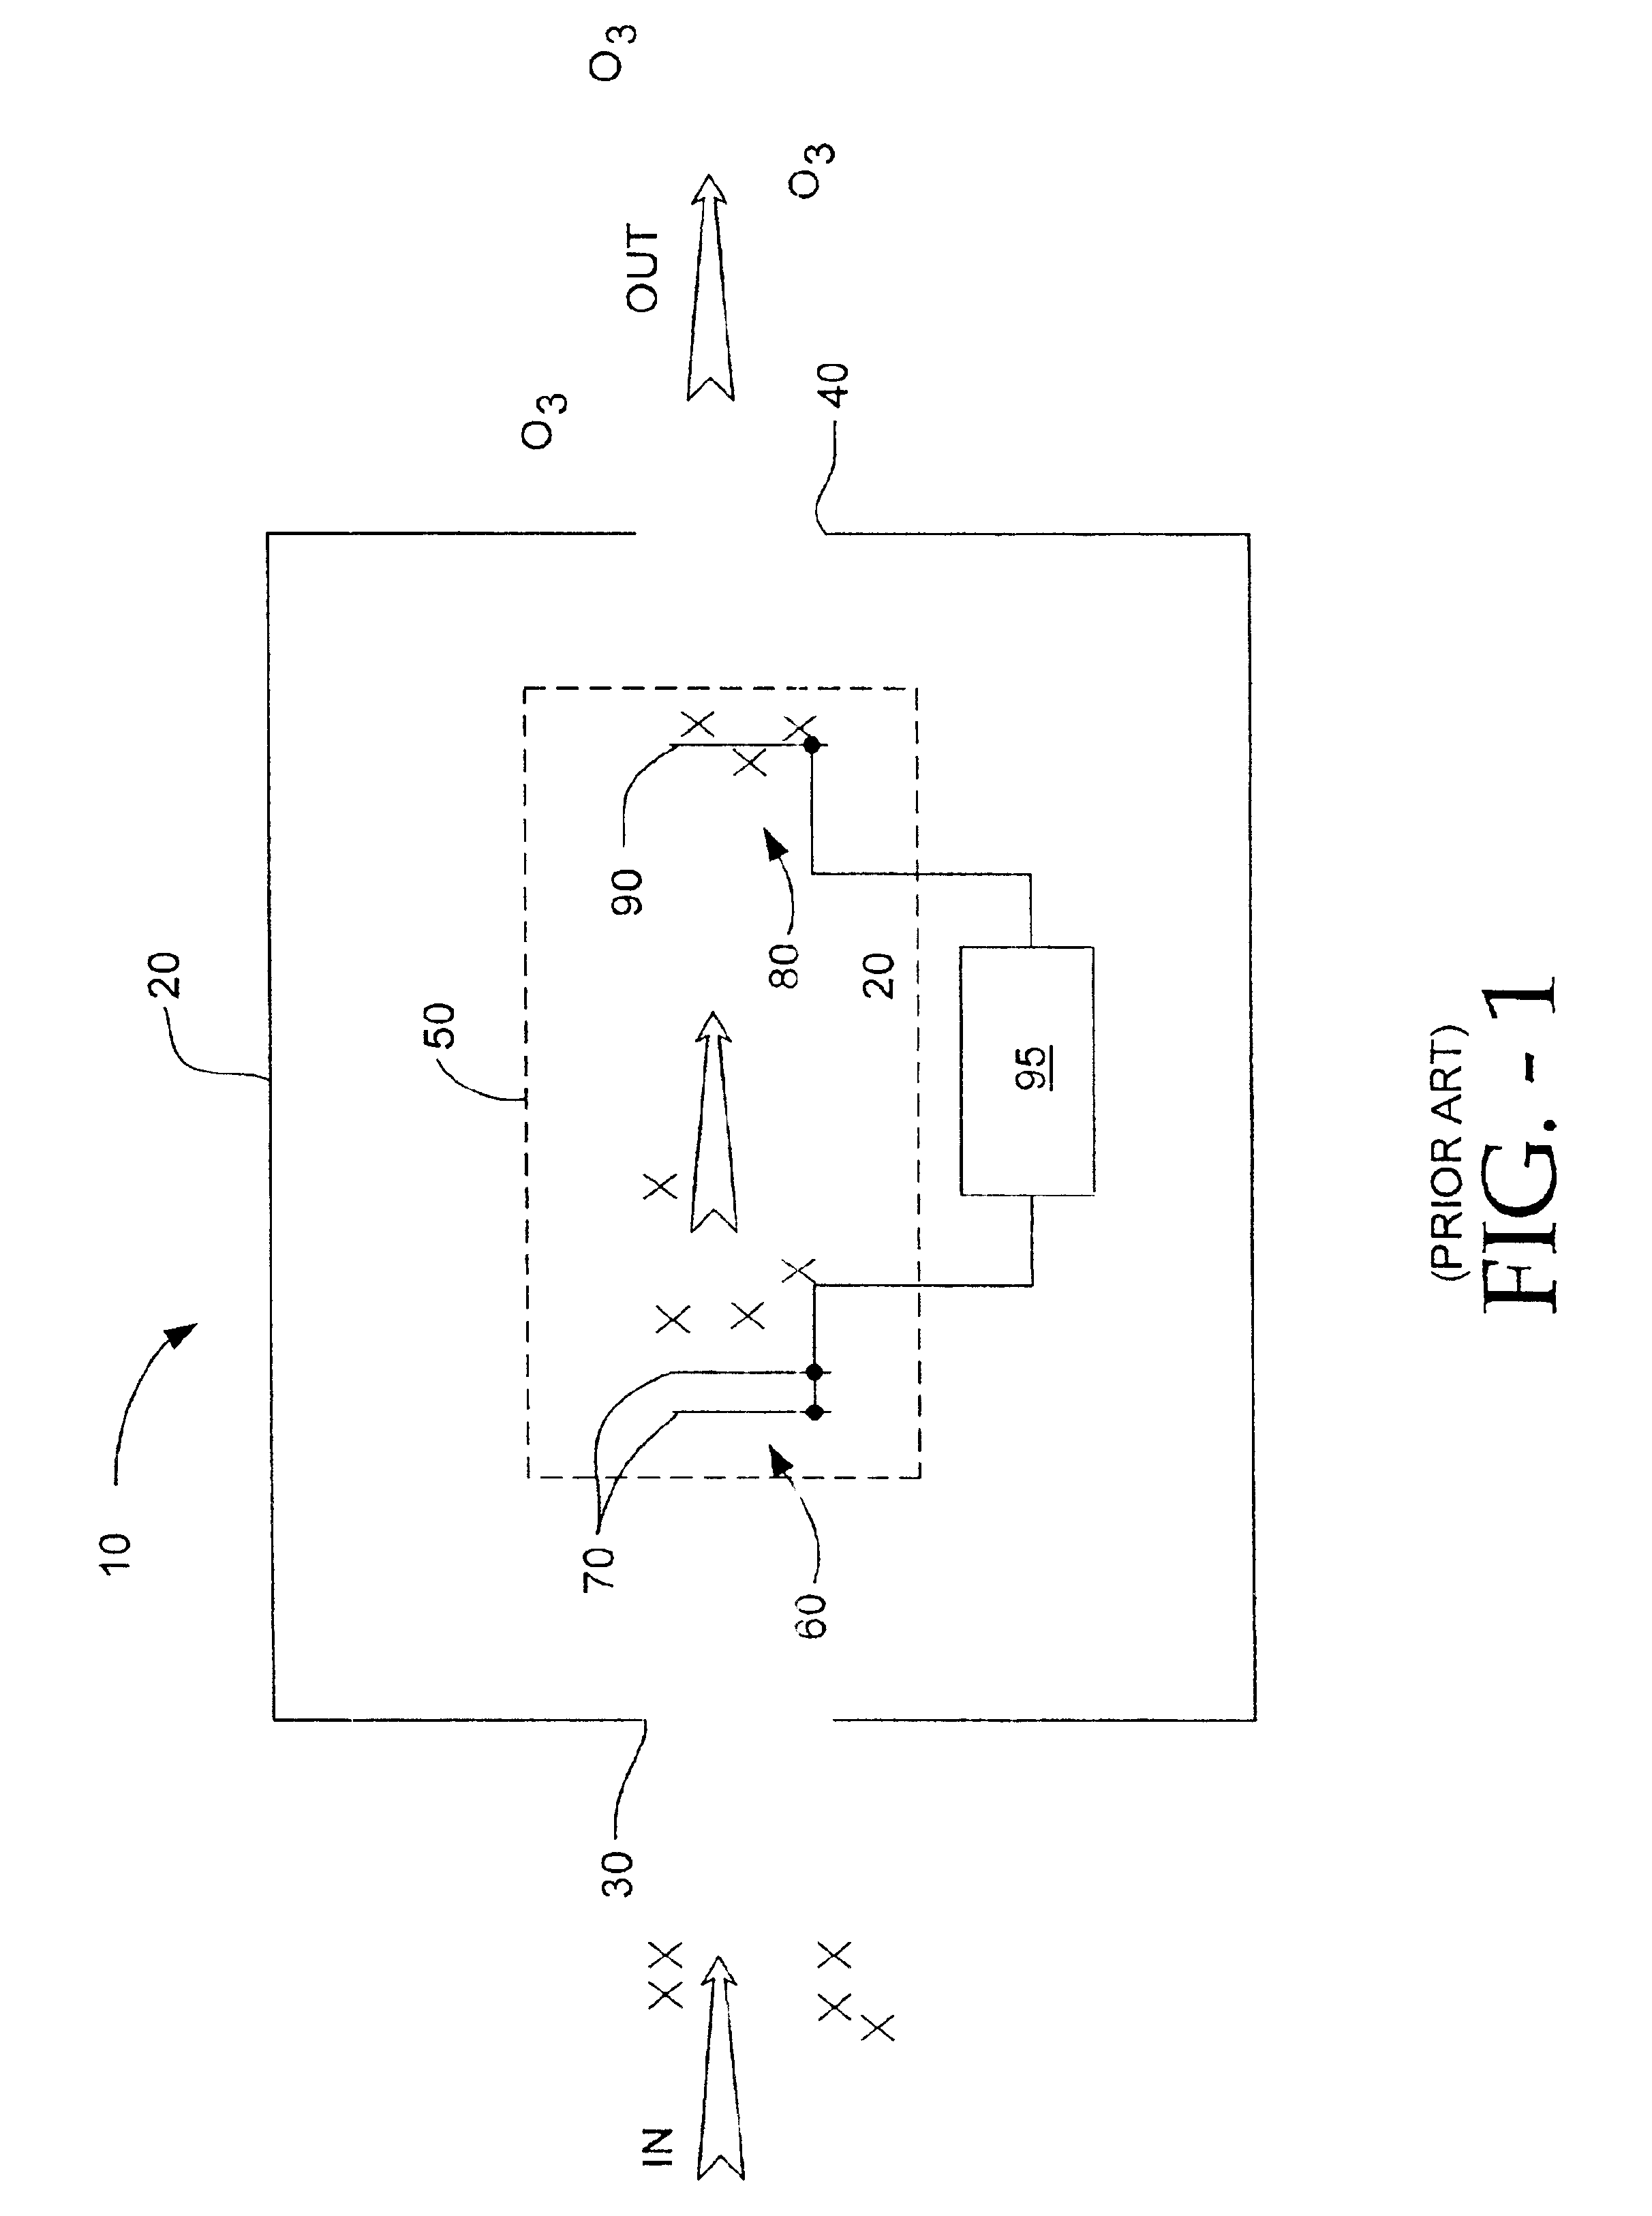 Electro-kinetic air transporter and conditioner device with enhanced anti-microorganism capability